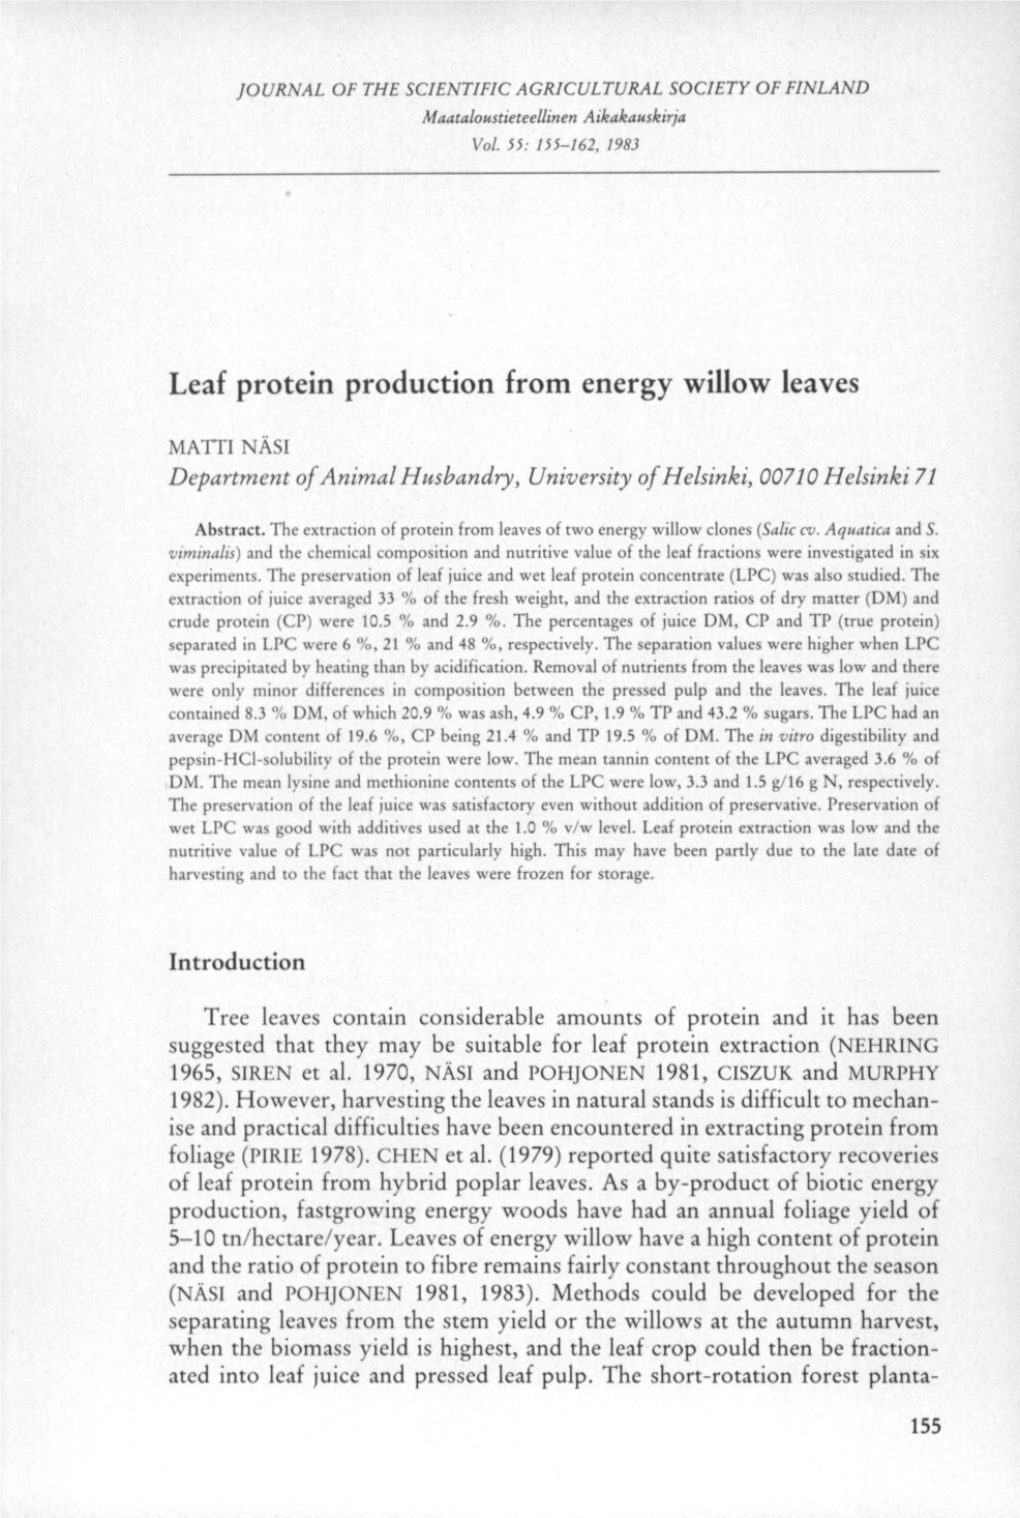 Leaf Protein Production from Energy Willow Leaves